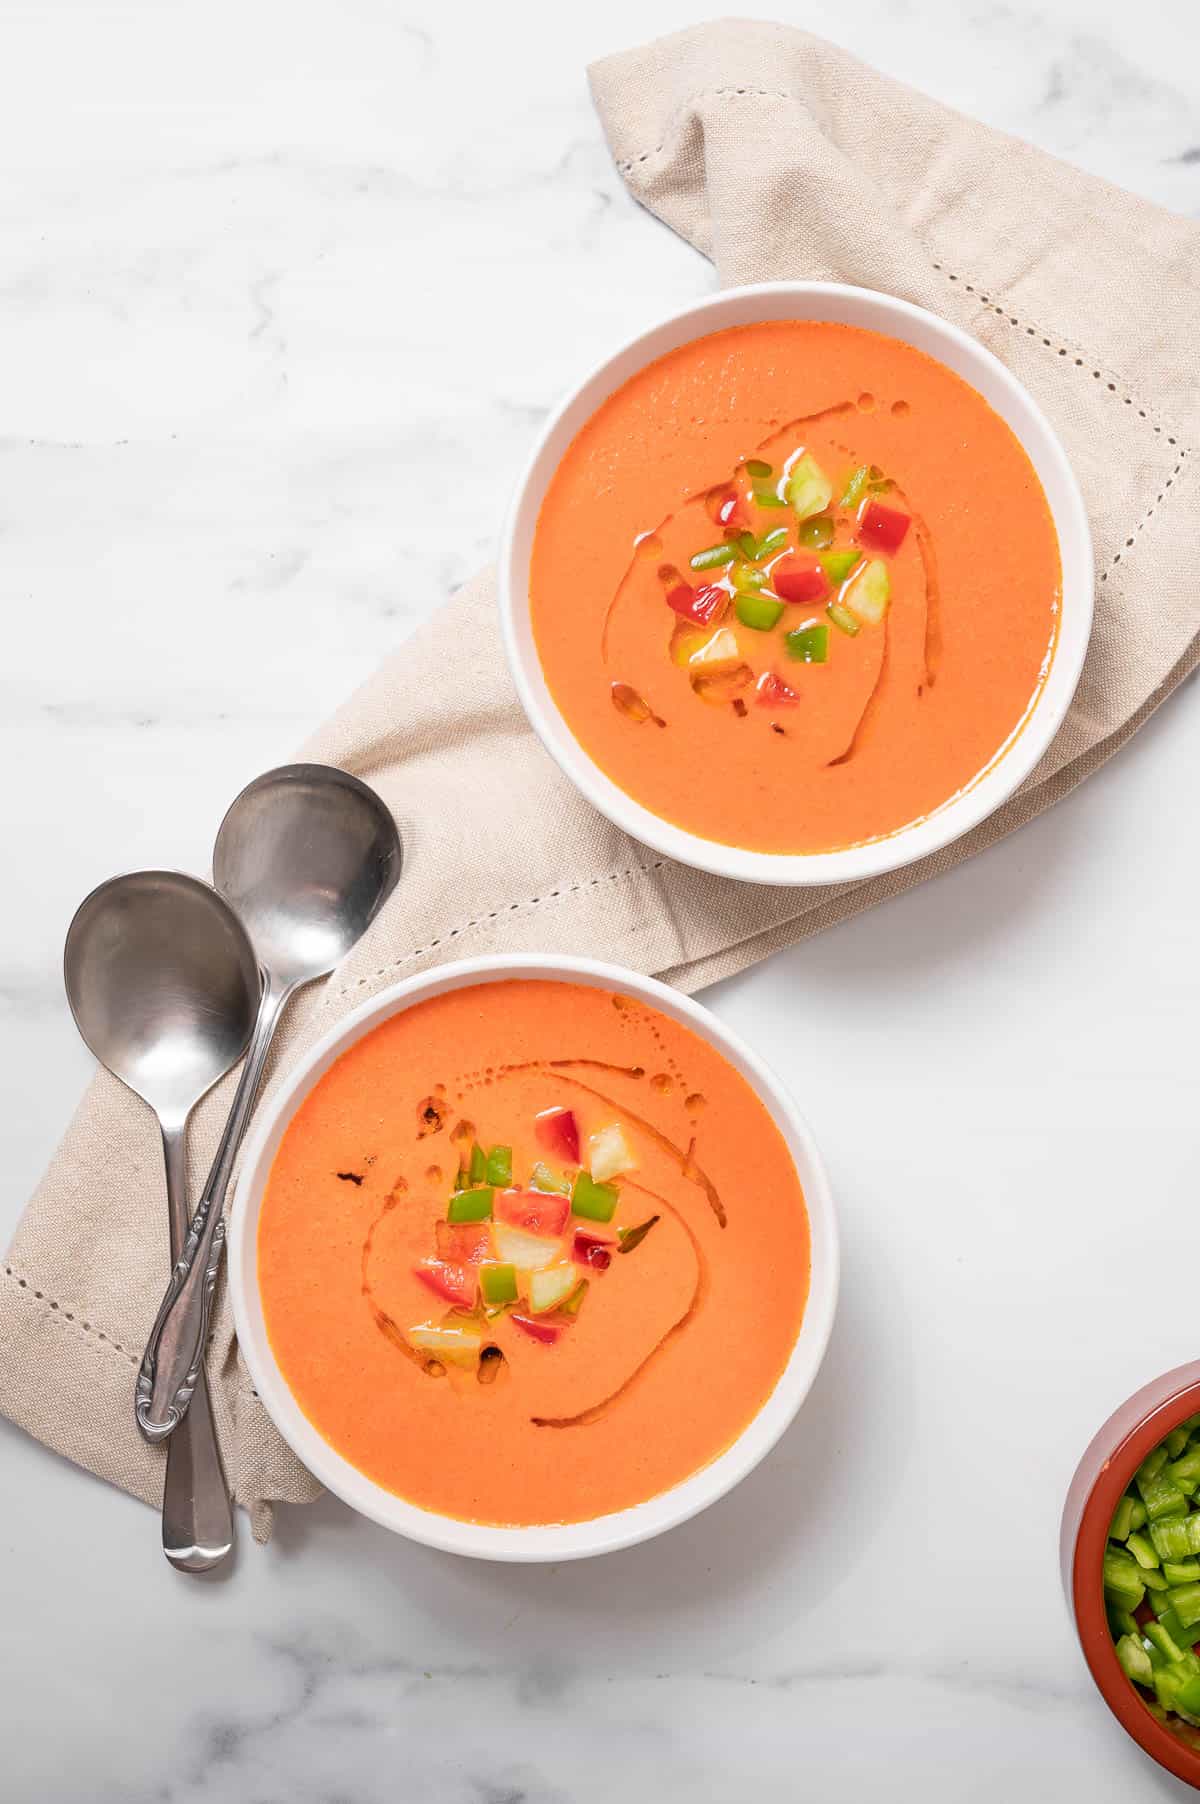 Spanish authentic gazpacho recipe served in two white bowls and topped with chopped vegetables.